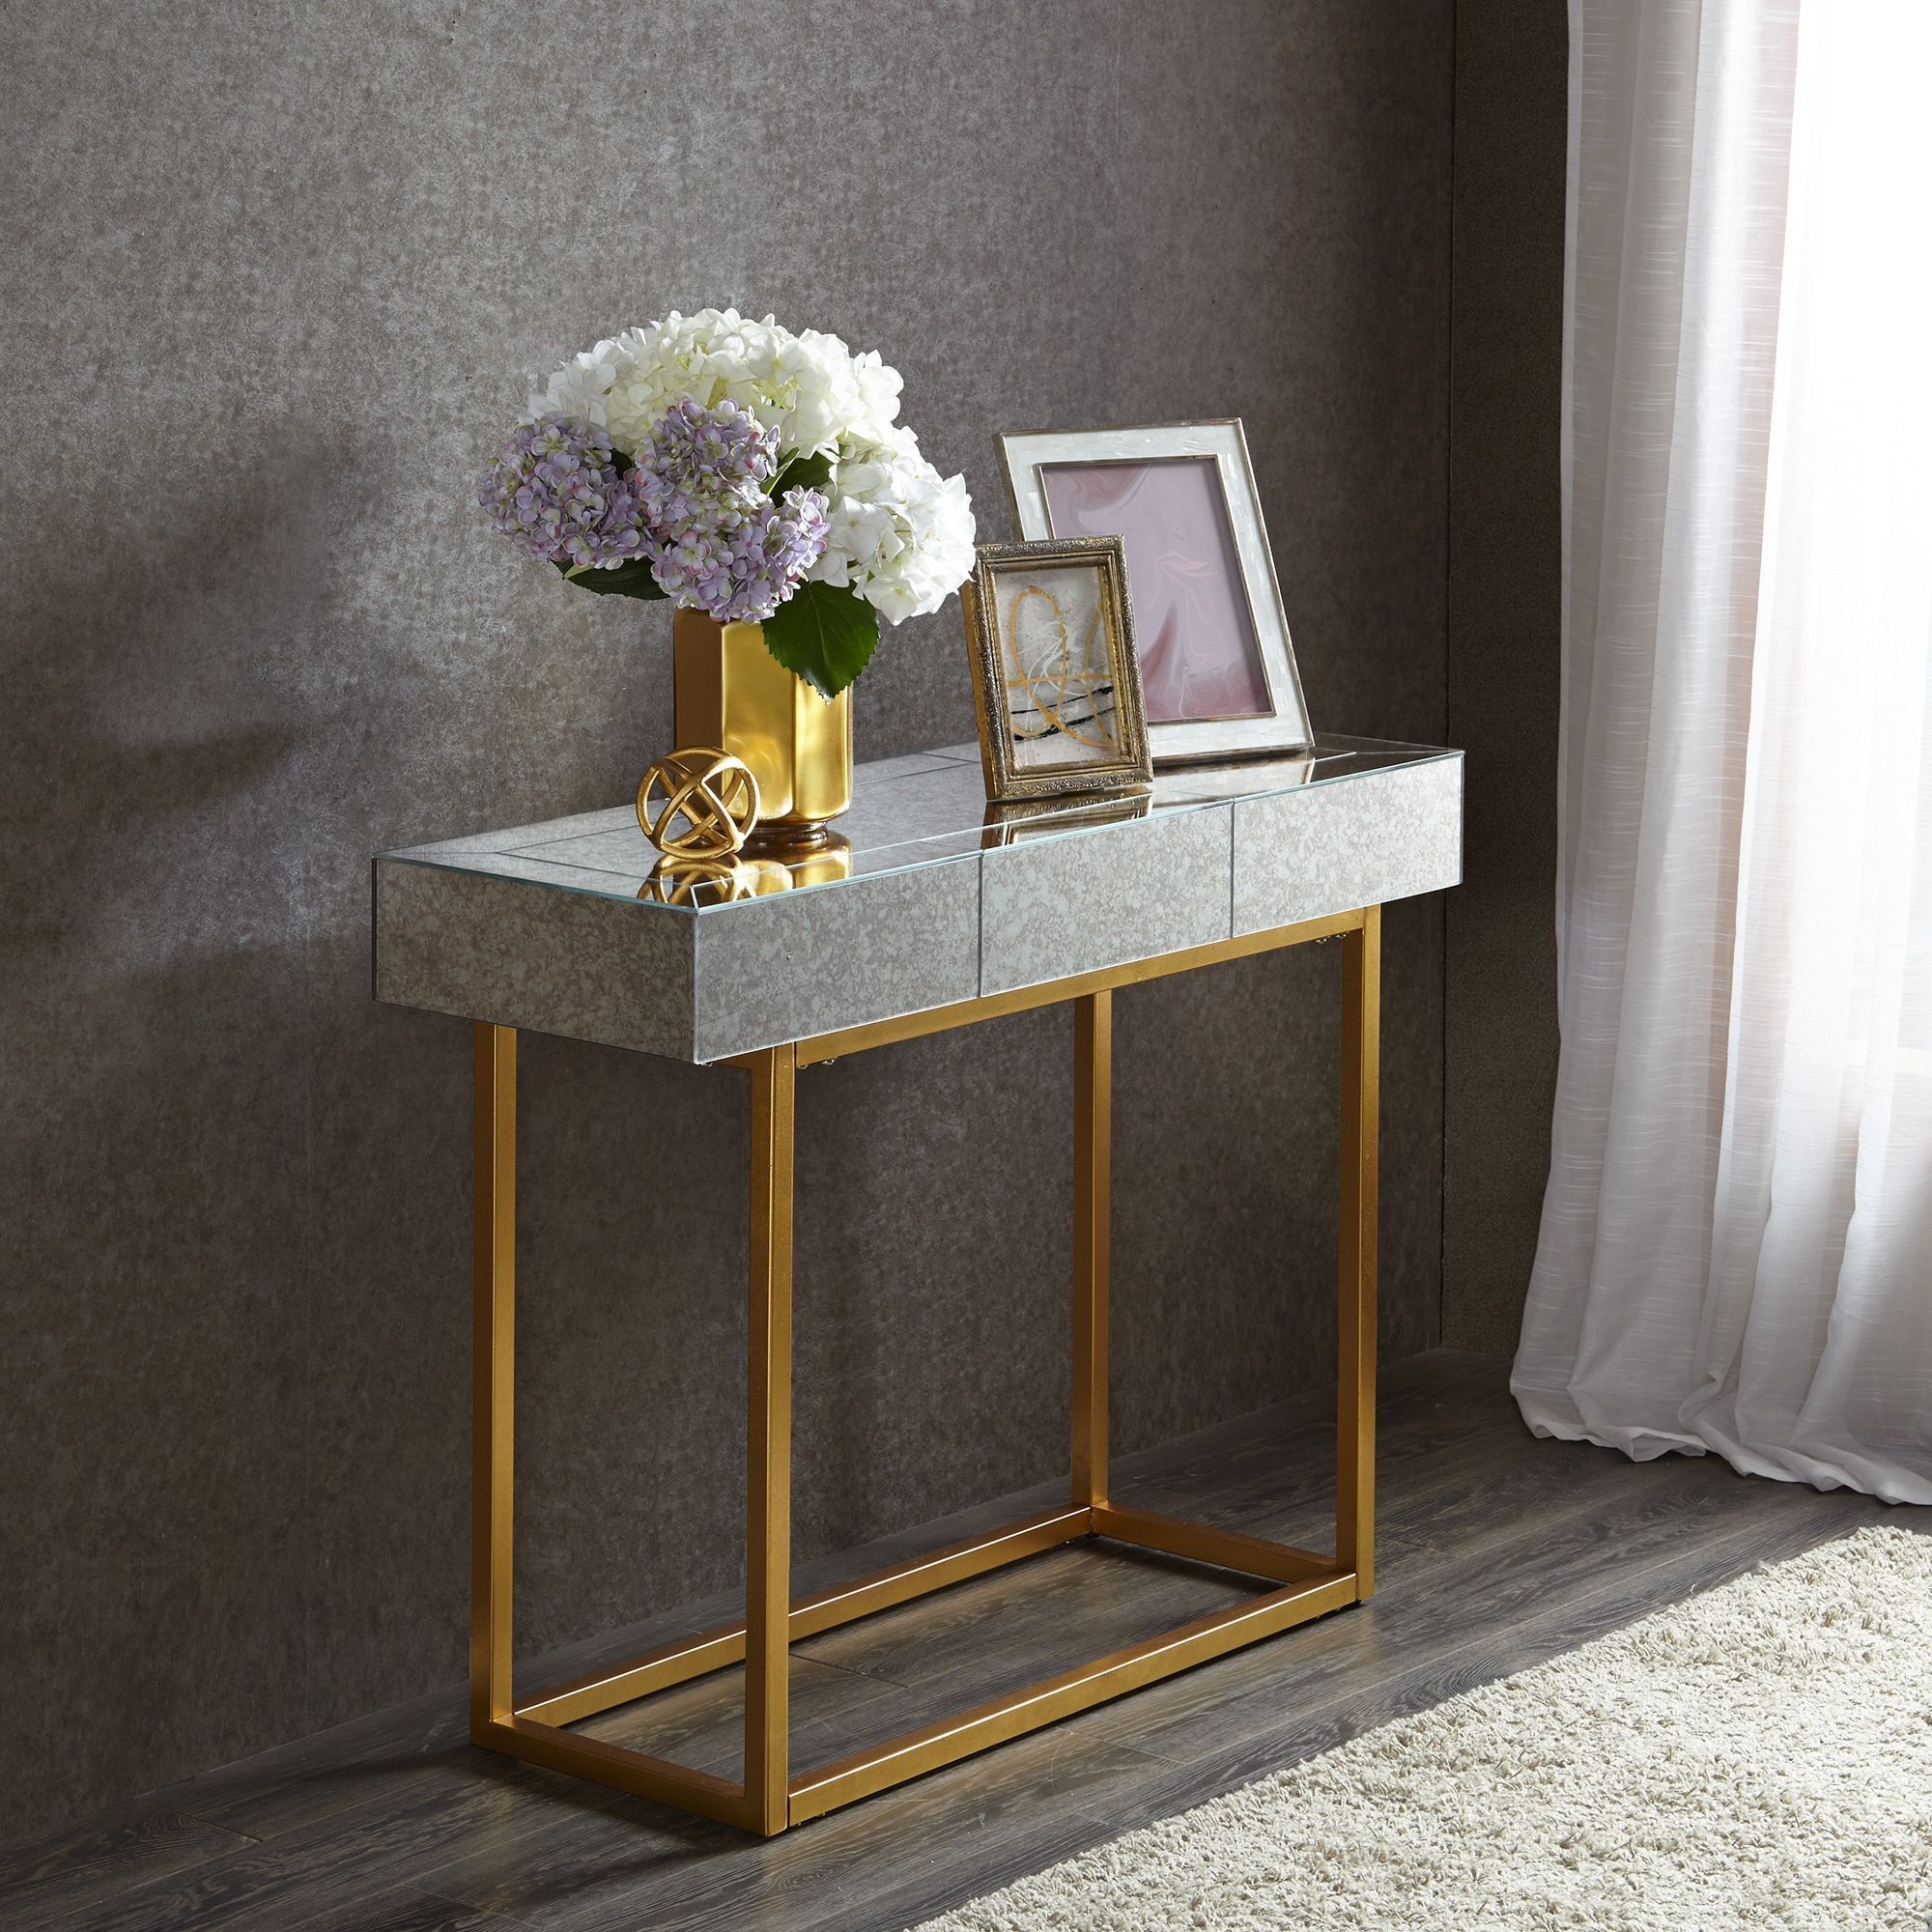 Sofa For Most Popular Gold And Mirror Modern Cube End Tables (View 8 of 20)